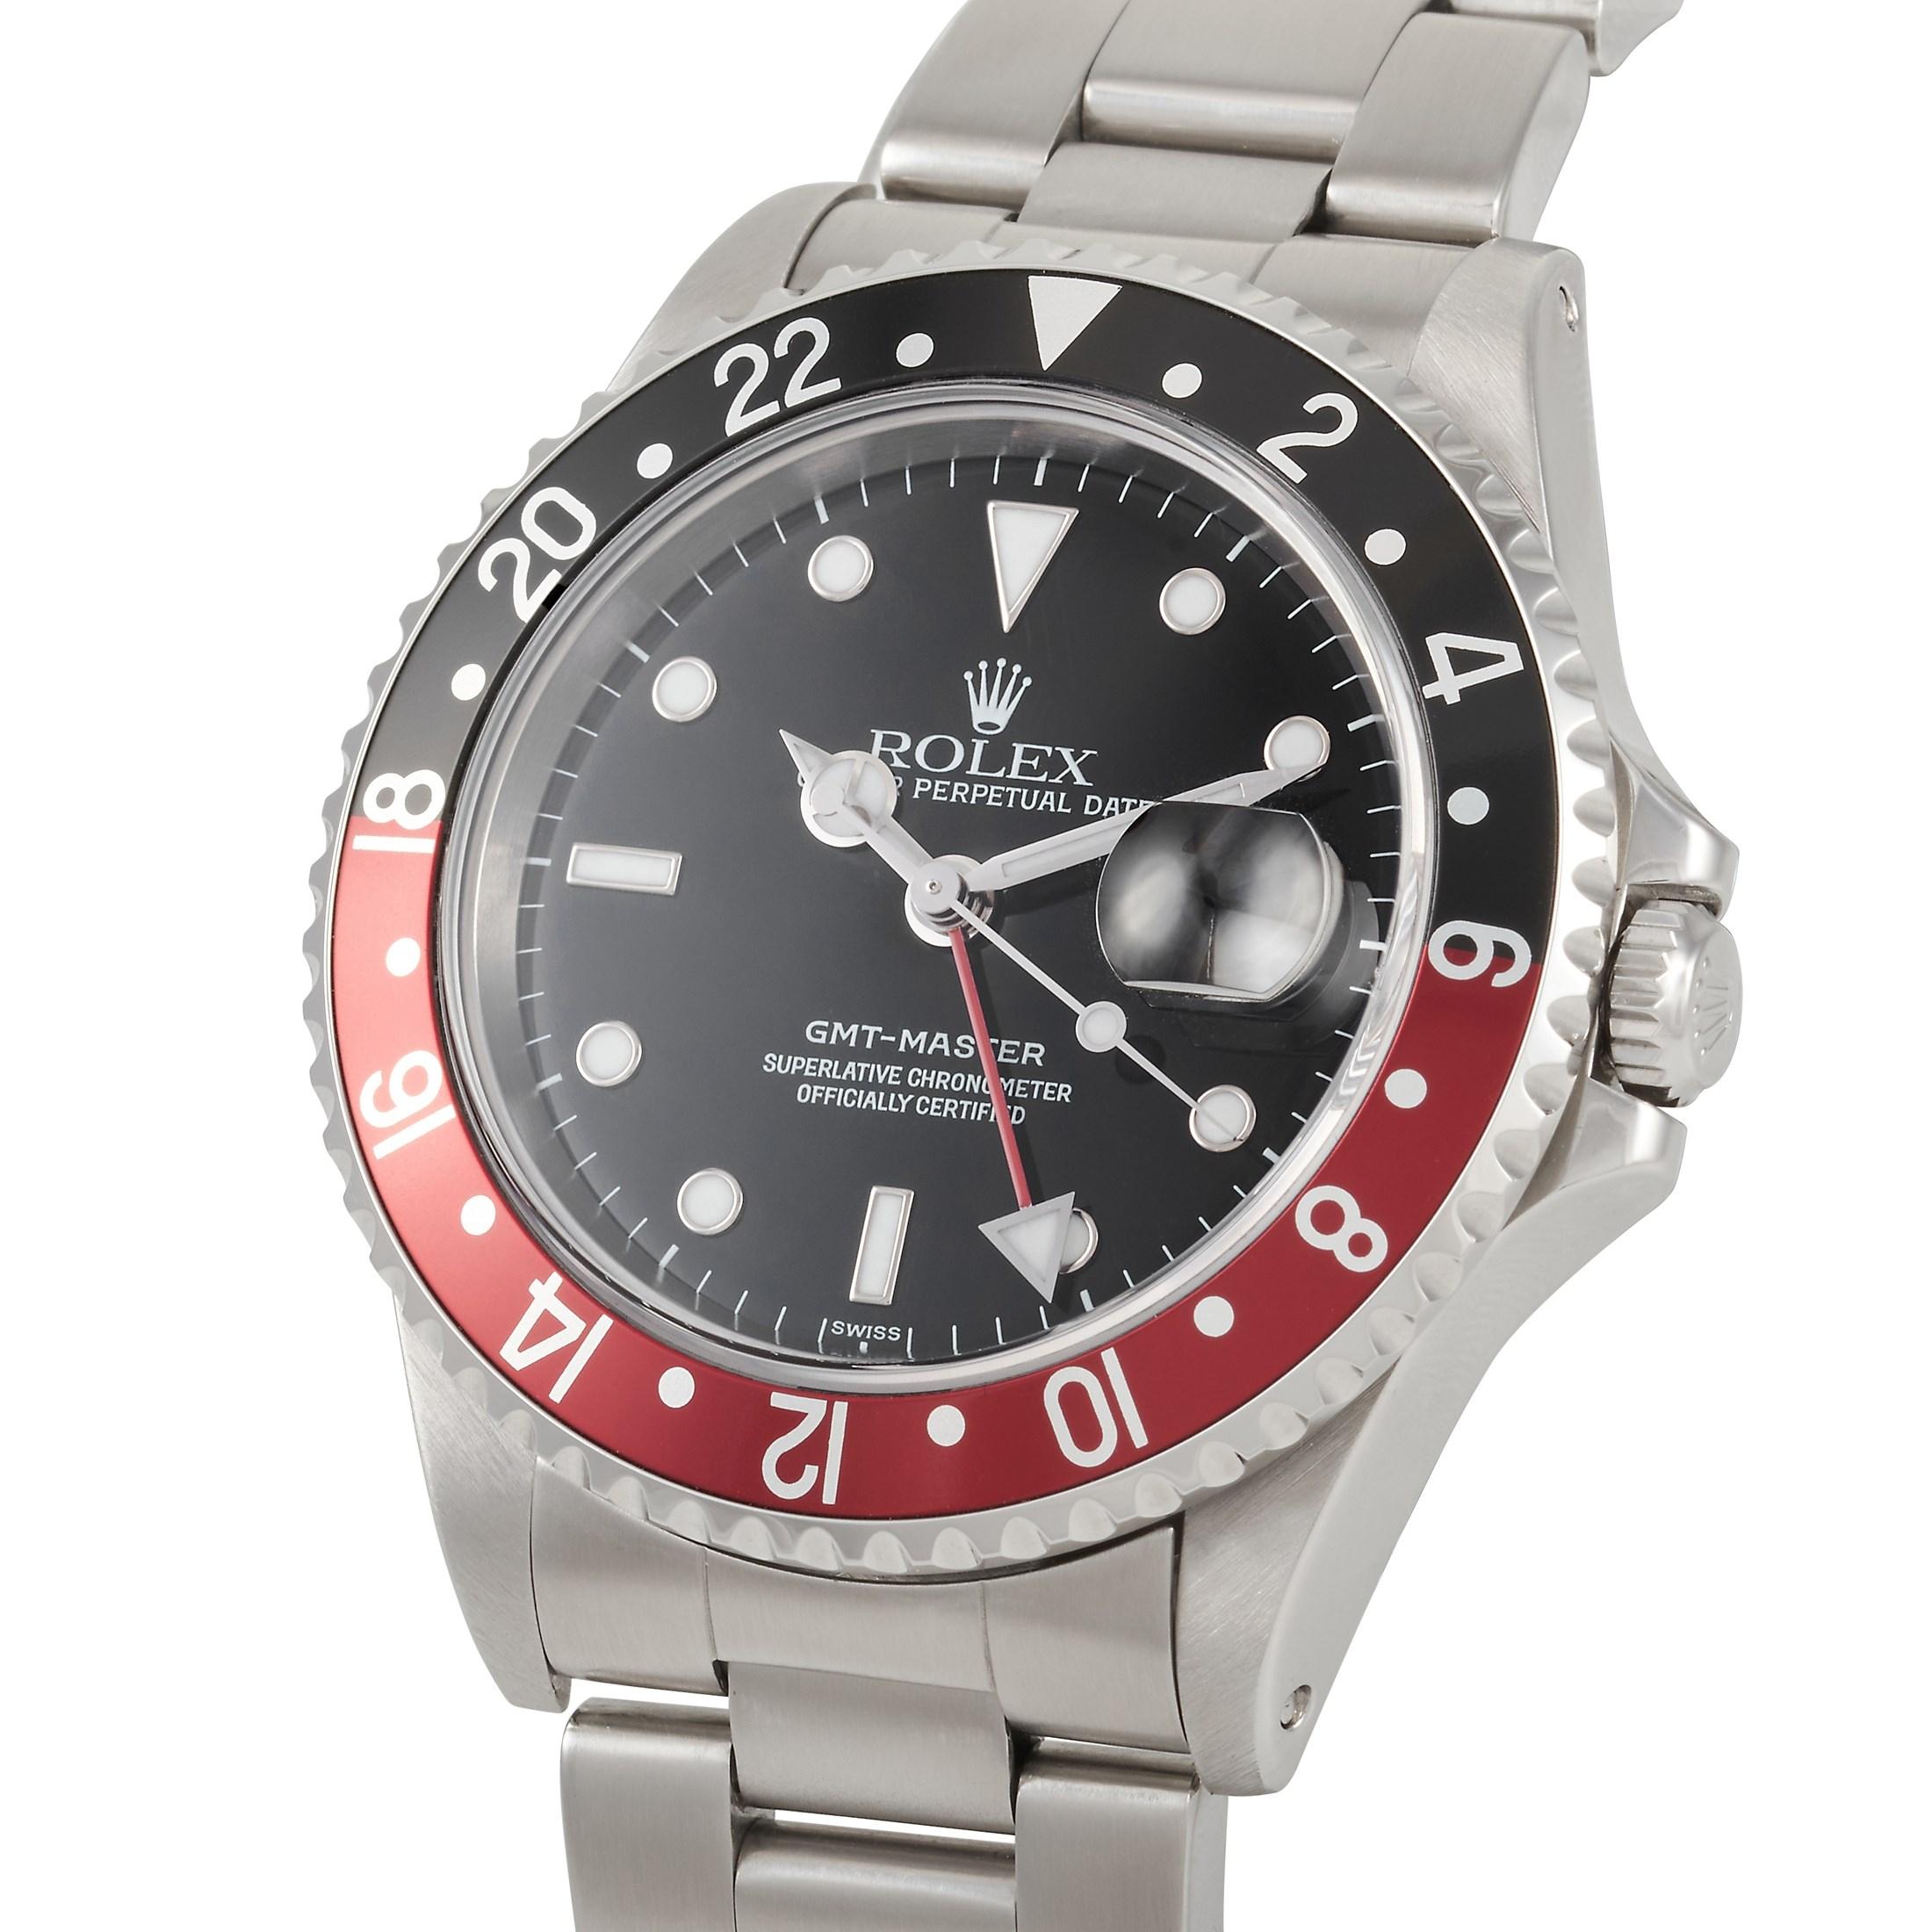 This Rolex GMT-Master Coke Watch, features an oystersteel case measuring 40mm in diameter with a 24 hour rotatable ceramic red and black bezel known by watch collectors as the 